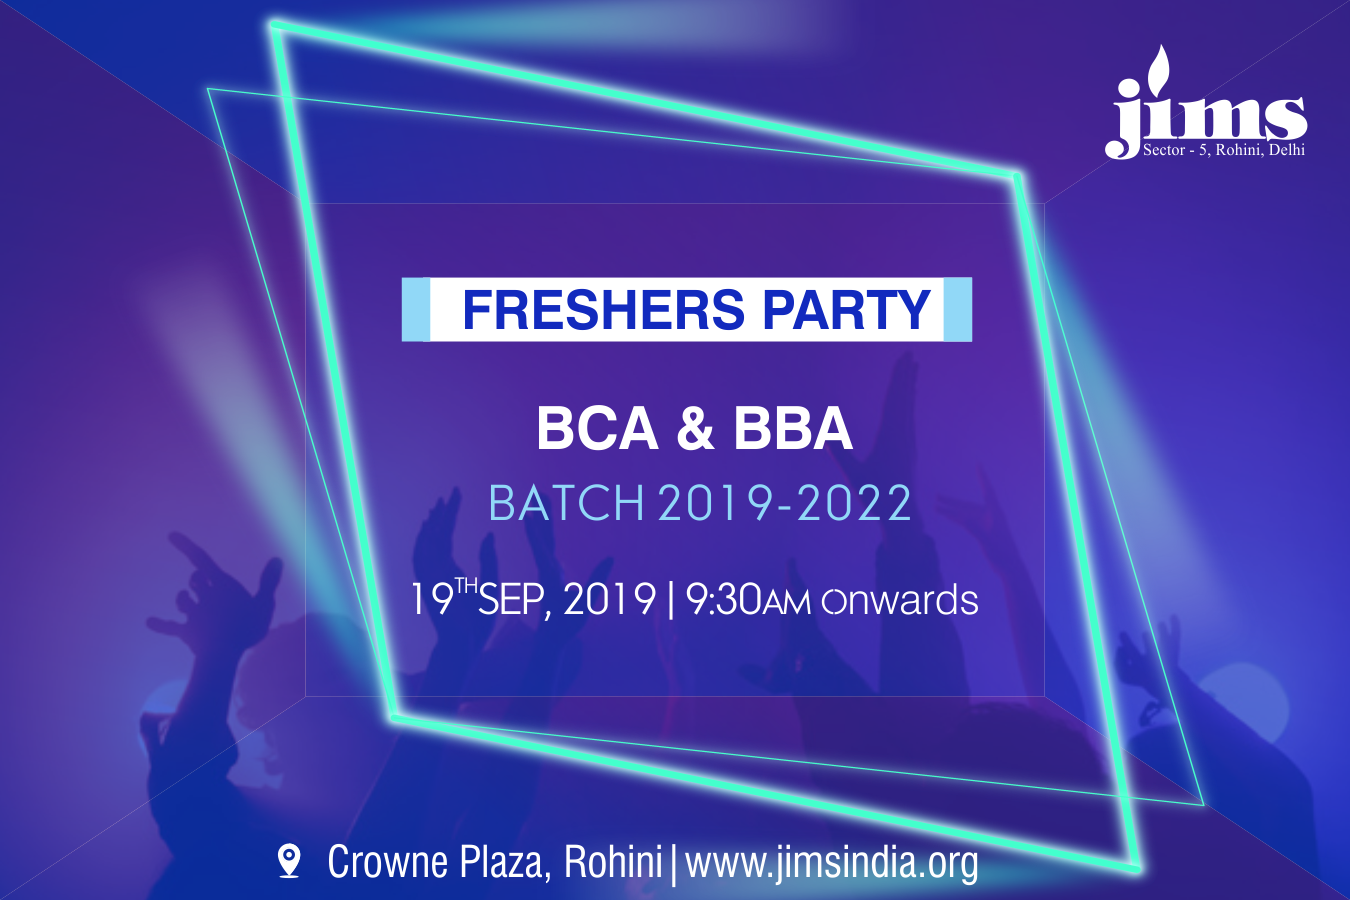 Cultural Club, JIMS Rohini is organising a Freshers Party 2019 on 19th Sep 2019 to Welcome Students of BBA & BCA 2019-22 Batch